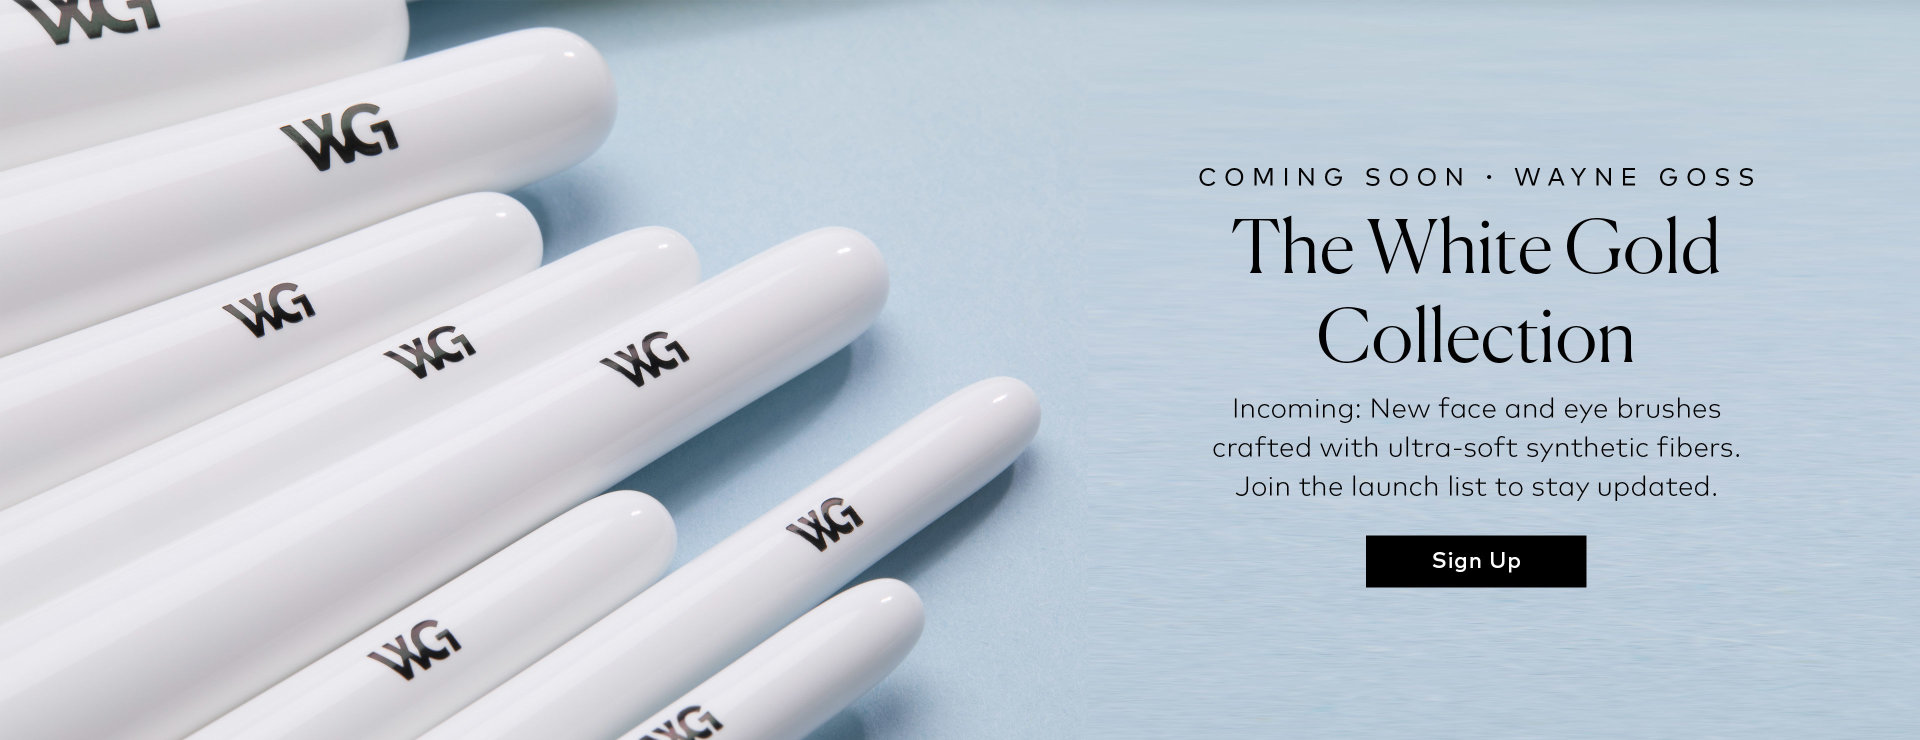 Sign up to be the first to shop the Wayne Goss The White Gold Collection on Beautylish.com!